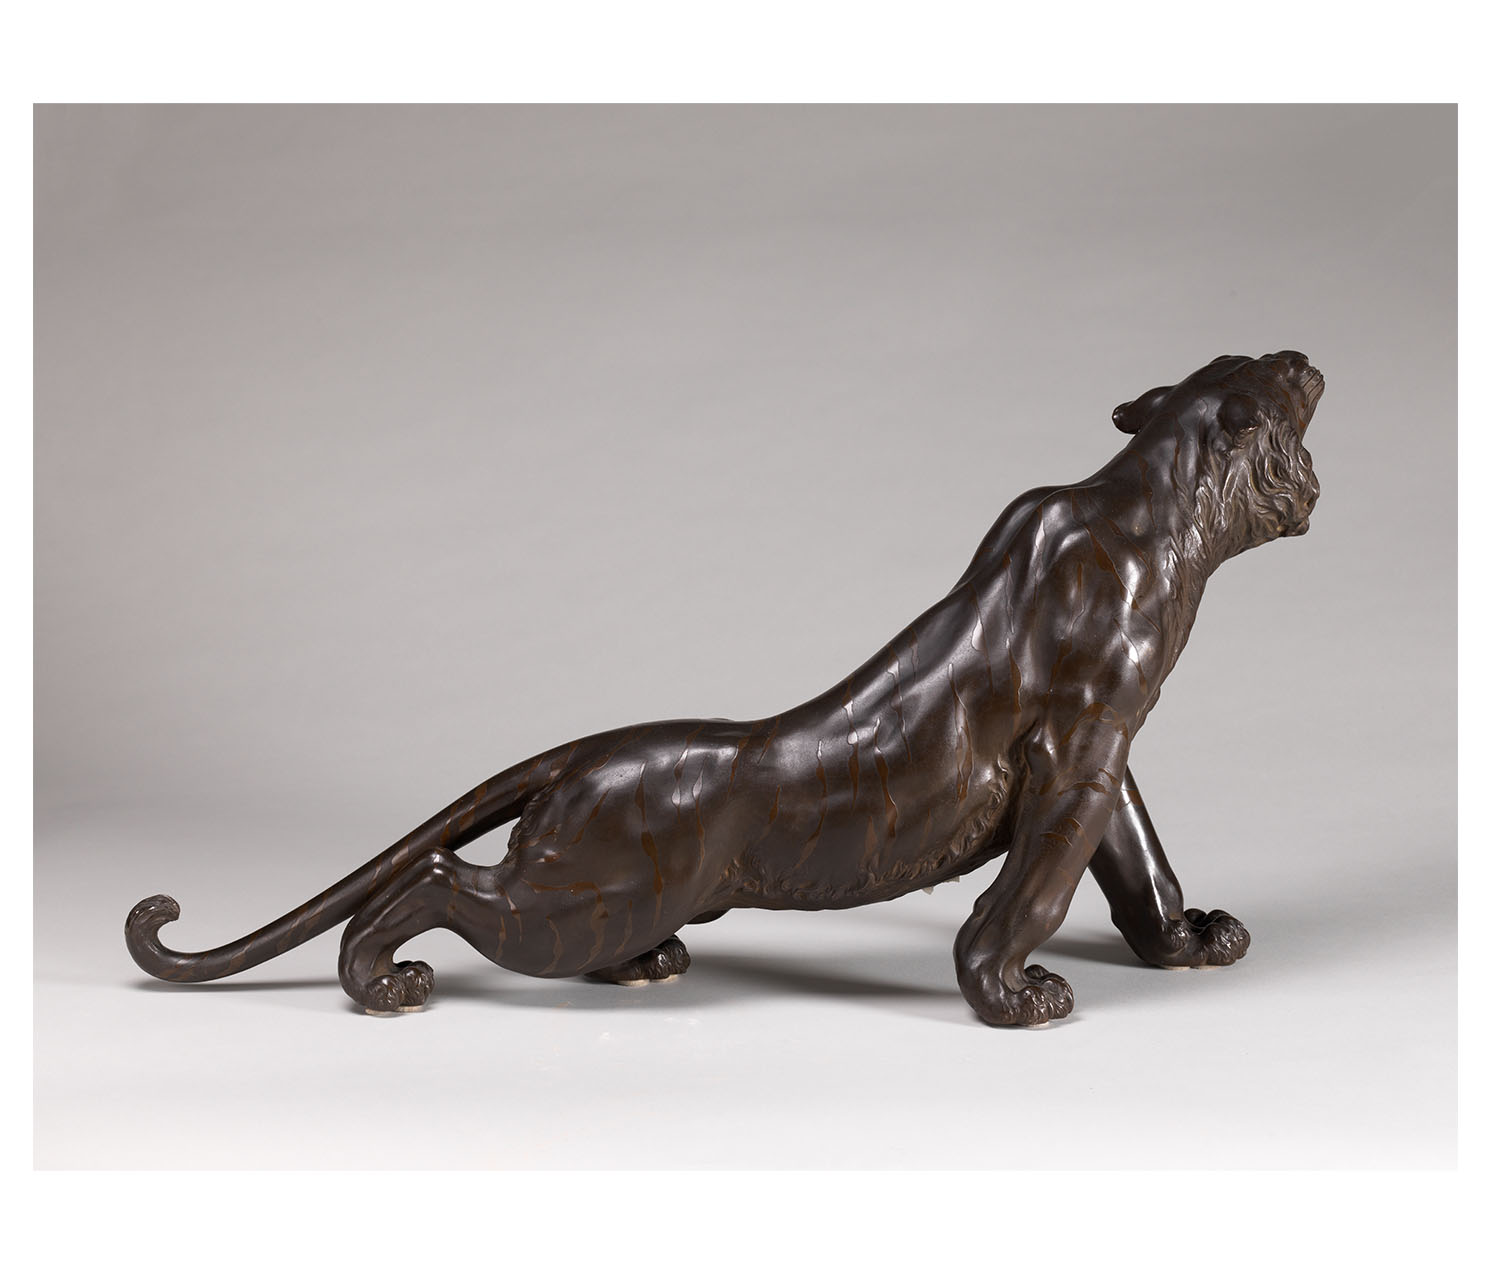 Okimono Tiger. by Atsuyoshi, produced by the Maruki company, 20th century, Japanese,  Bronze. Gift of Jane Hill Told’59 and William H. Told, Jr., SC 2016.39.4